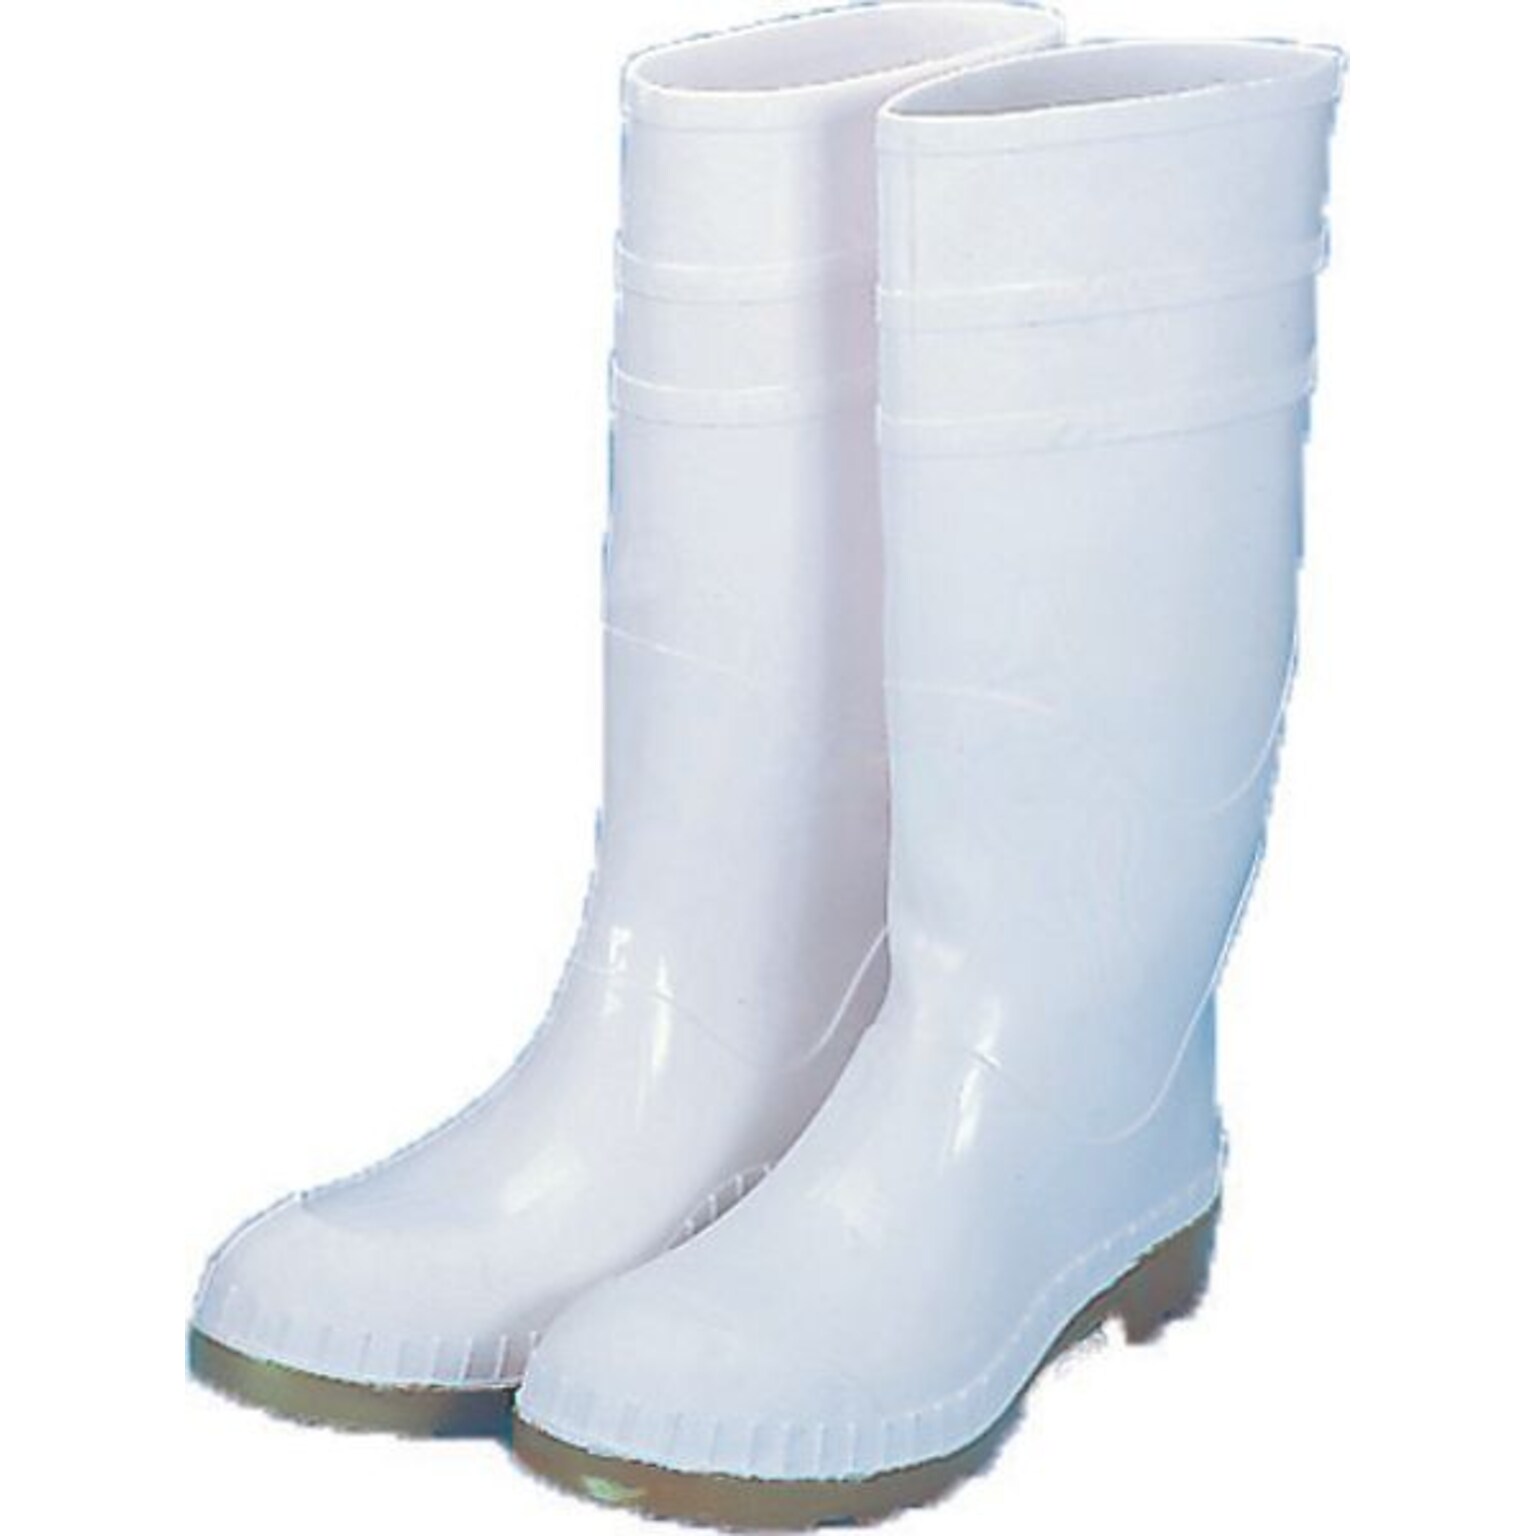 Mutual Industries 16 PVC Sock Boots With Steel Toe, White, Size 9